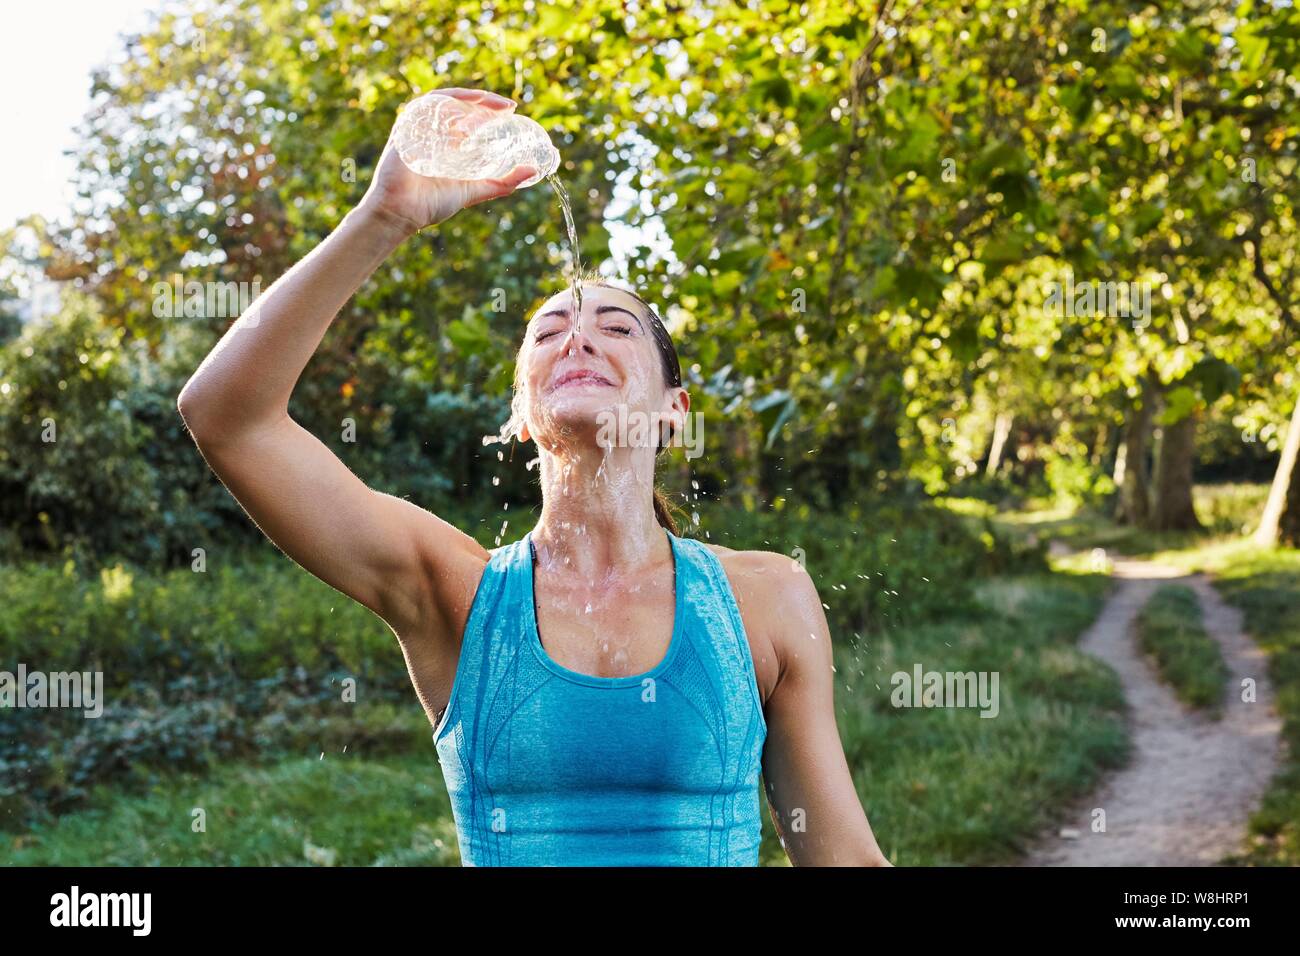 Young woman pouring water over her face. Stock Photo